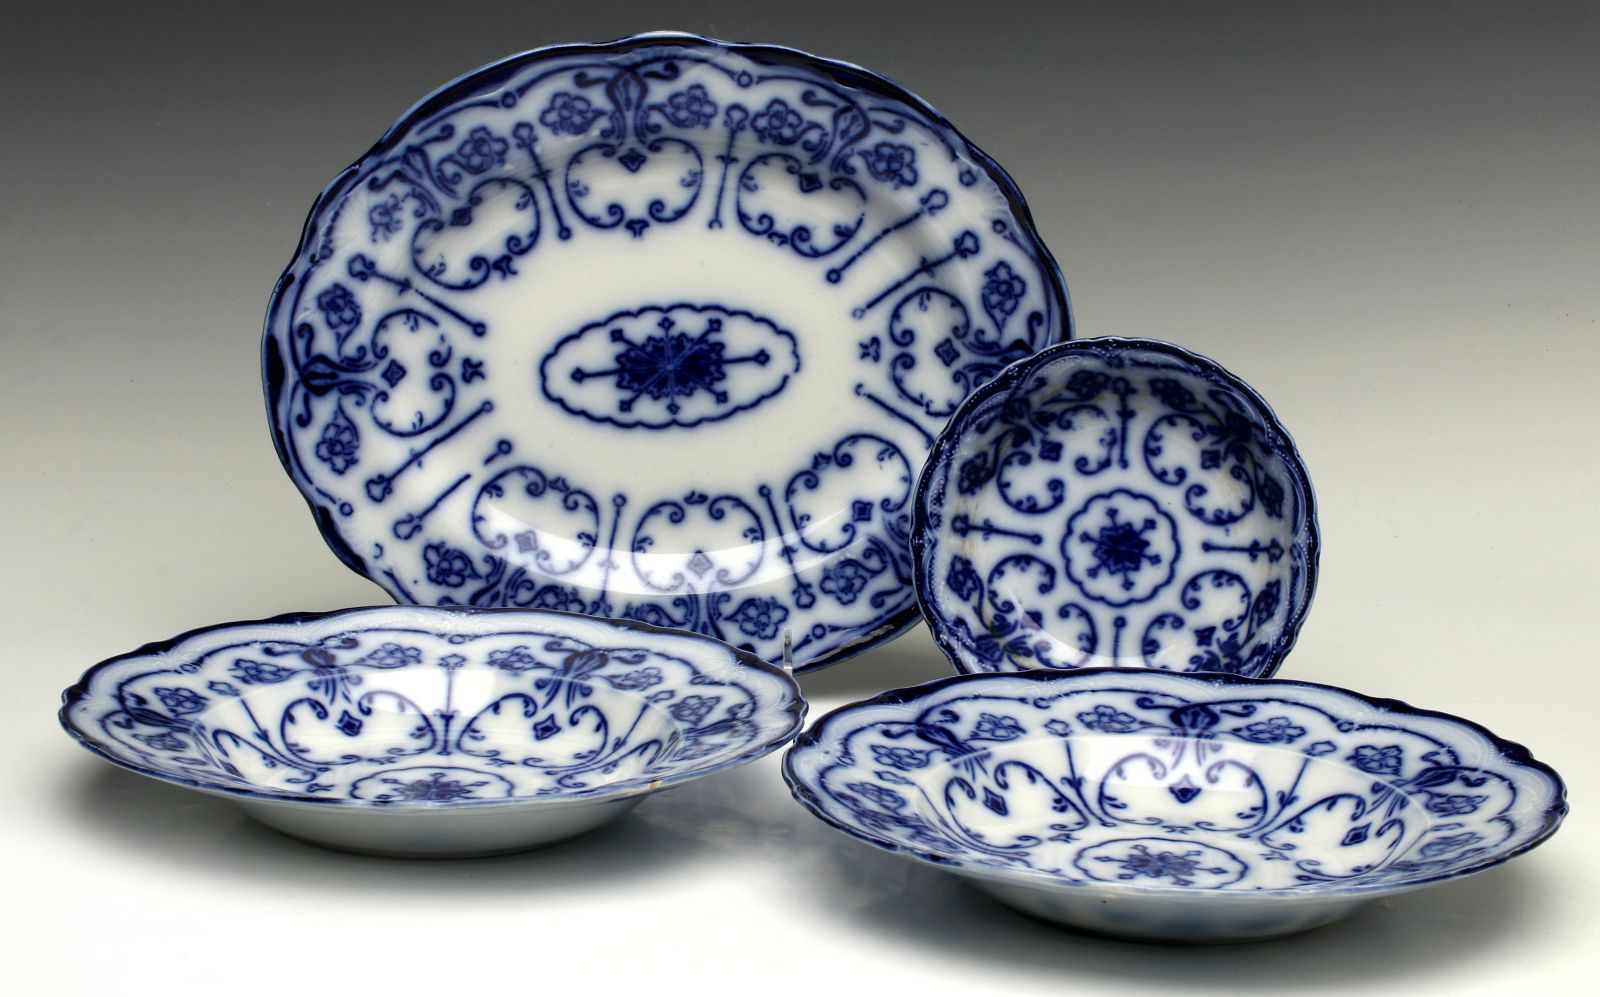 CONWAY FLOW BLUE SERVING PLATTER AND BOWLS